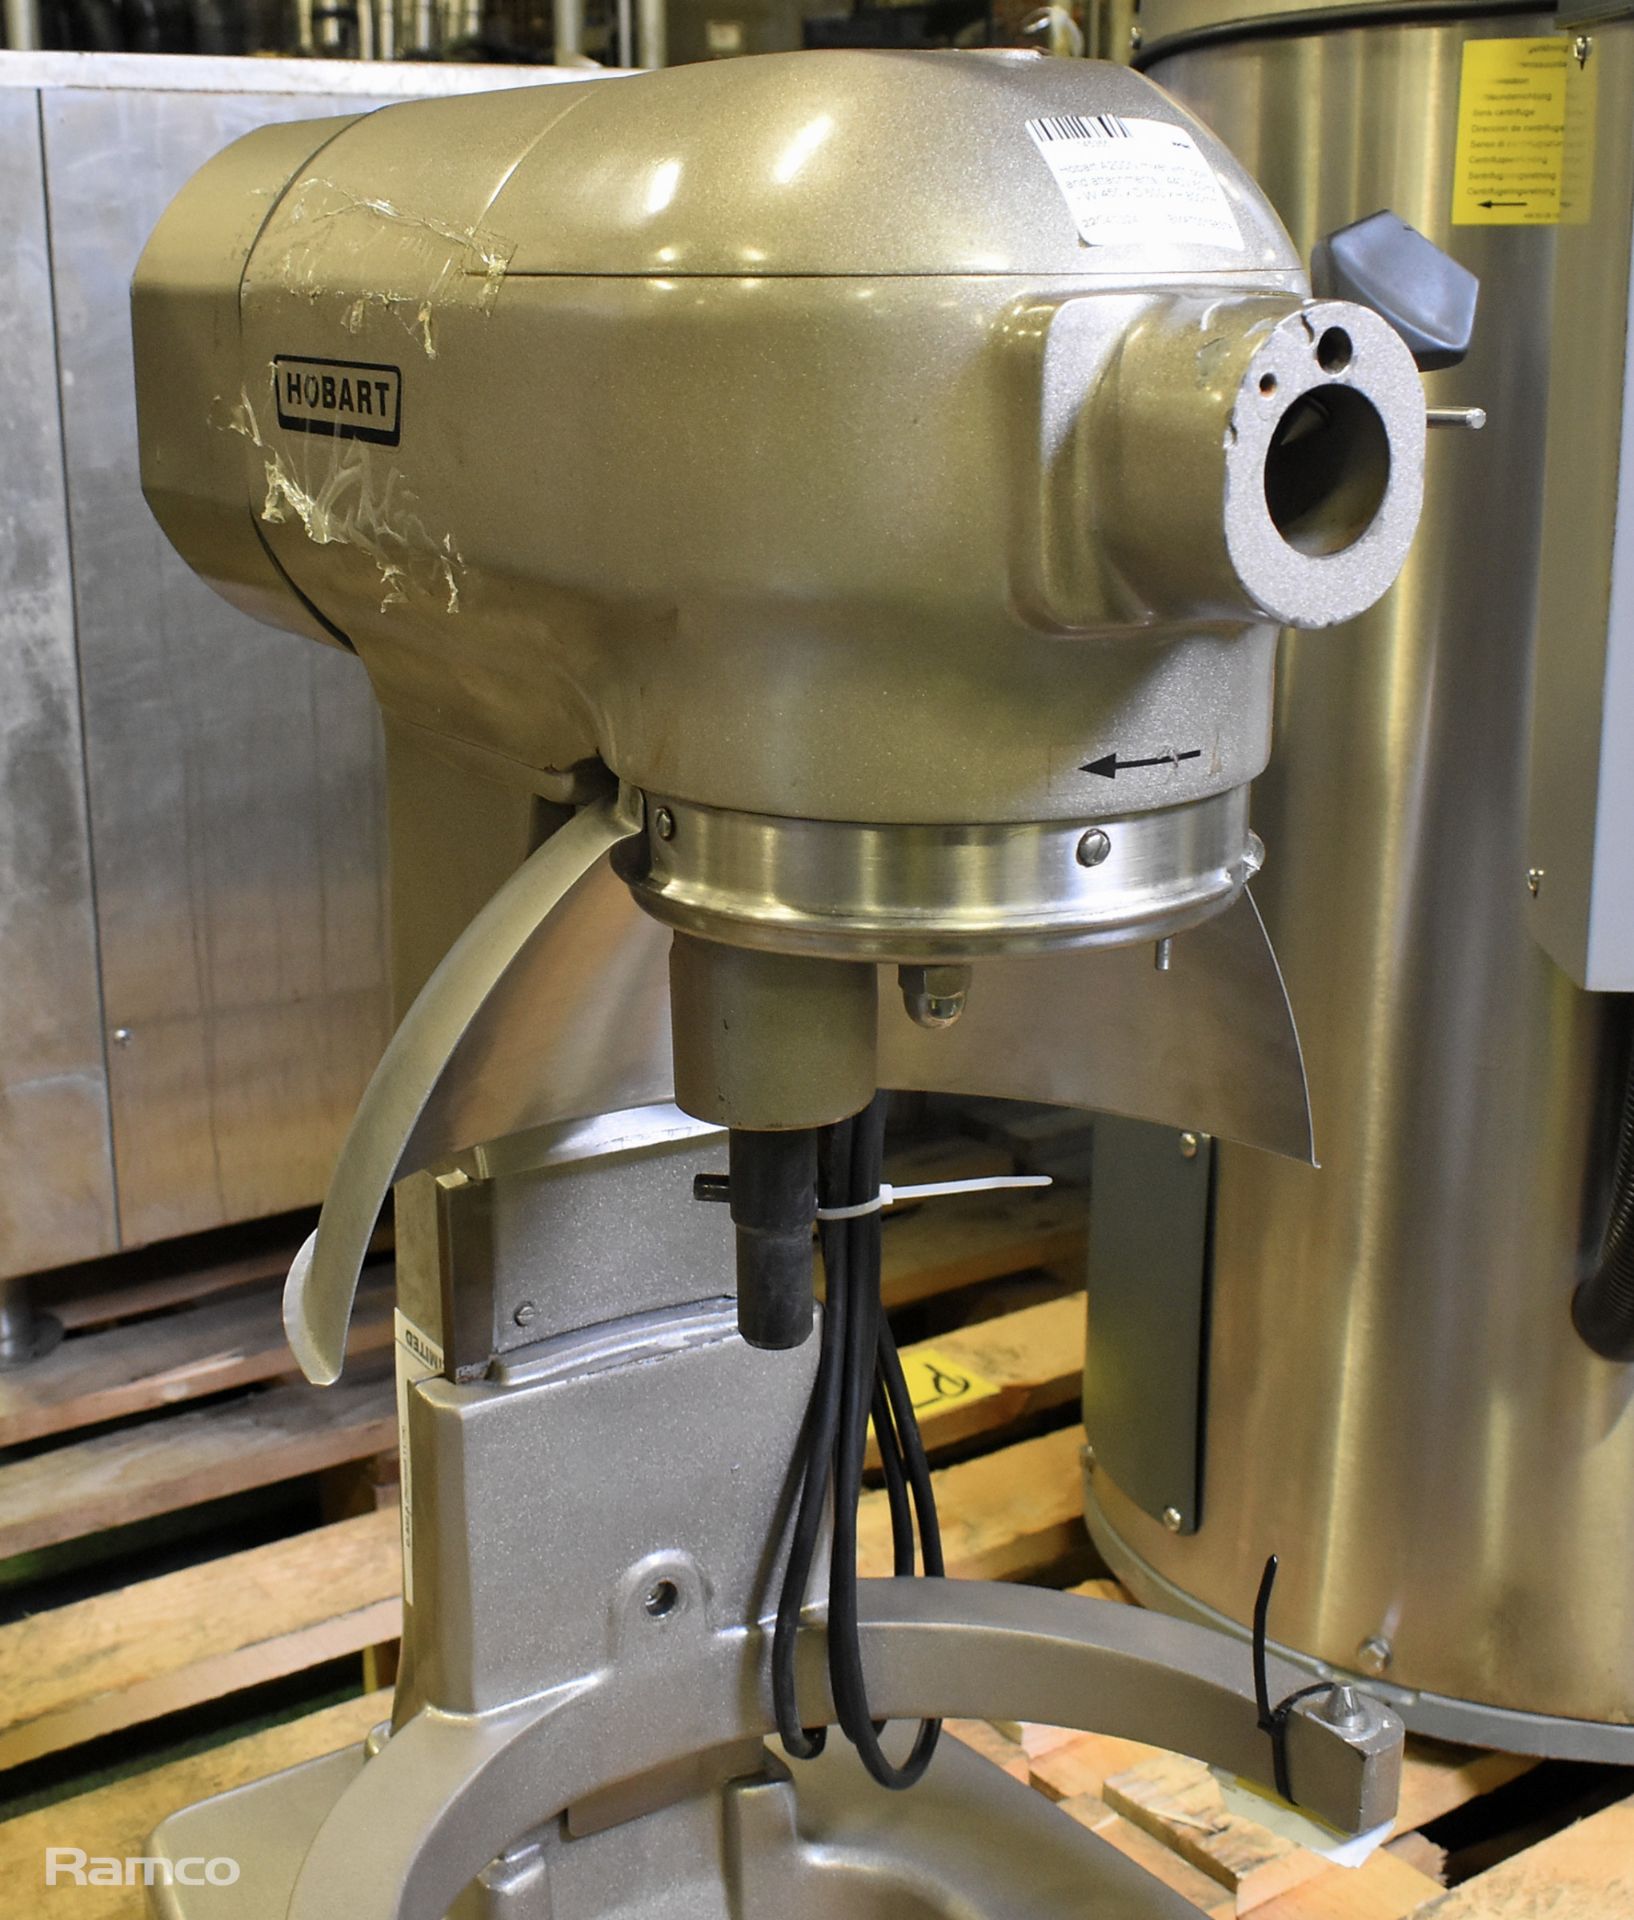 Hobart A200N mixer with bowl and attachments - 440V - 60Hz - W 450 x D 600 x H 800mm - Image 5 of 9